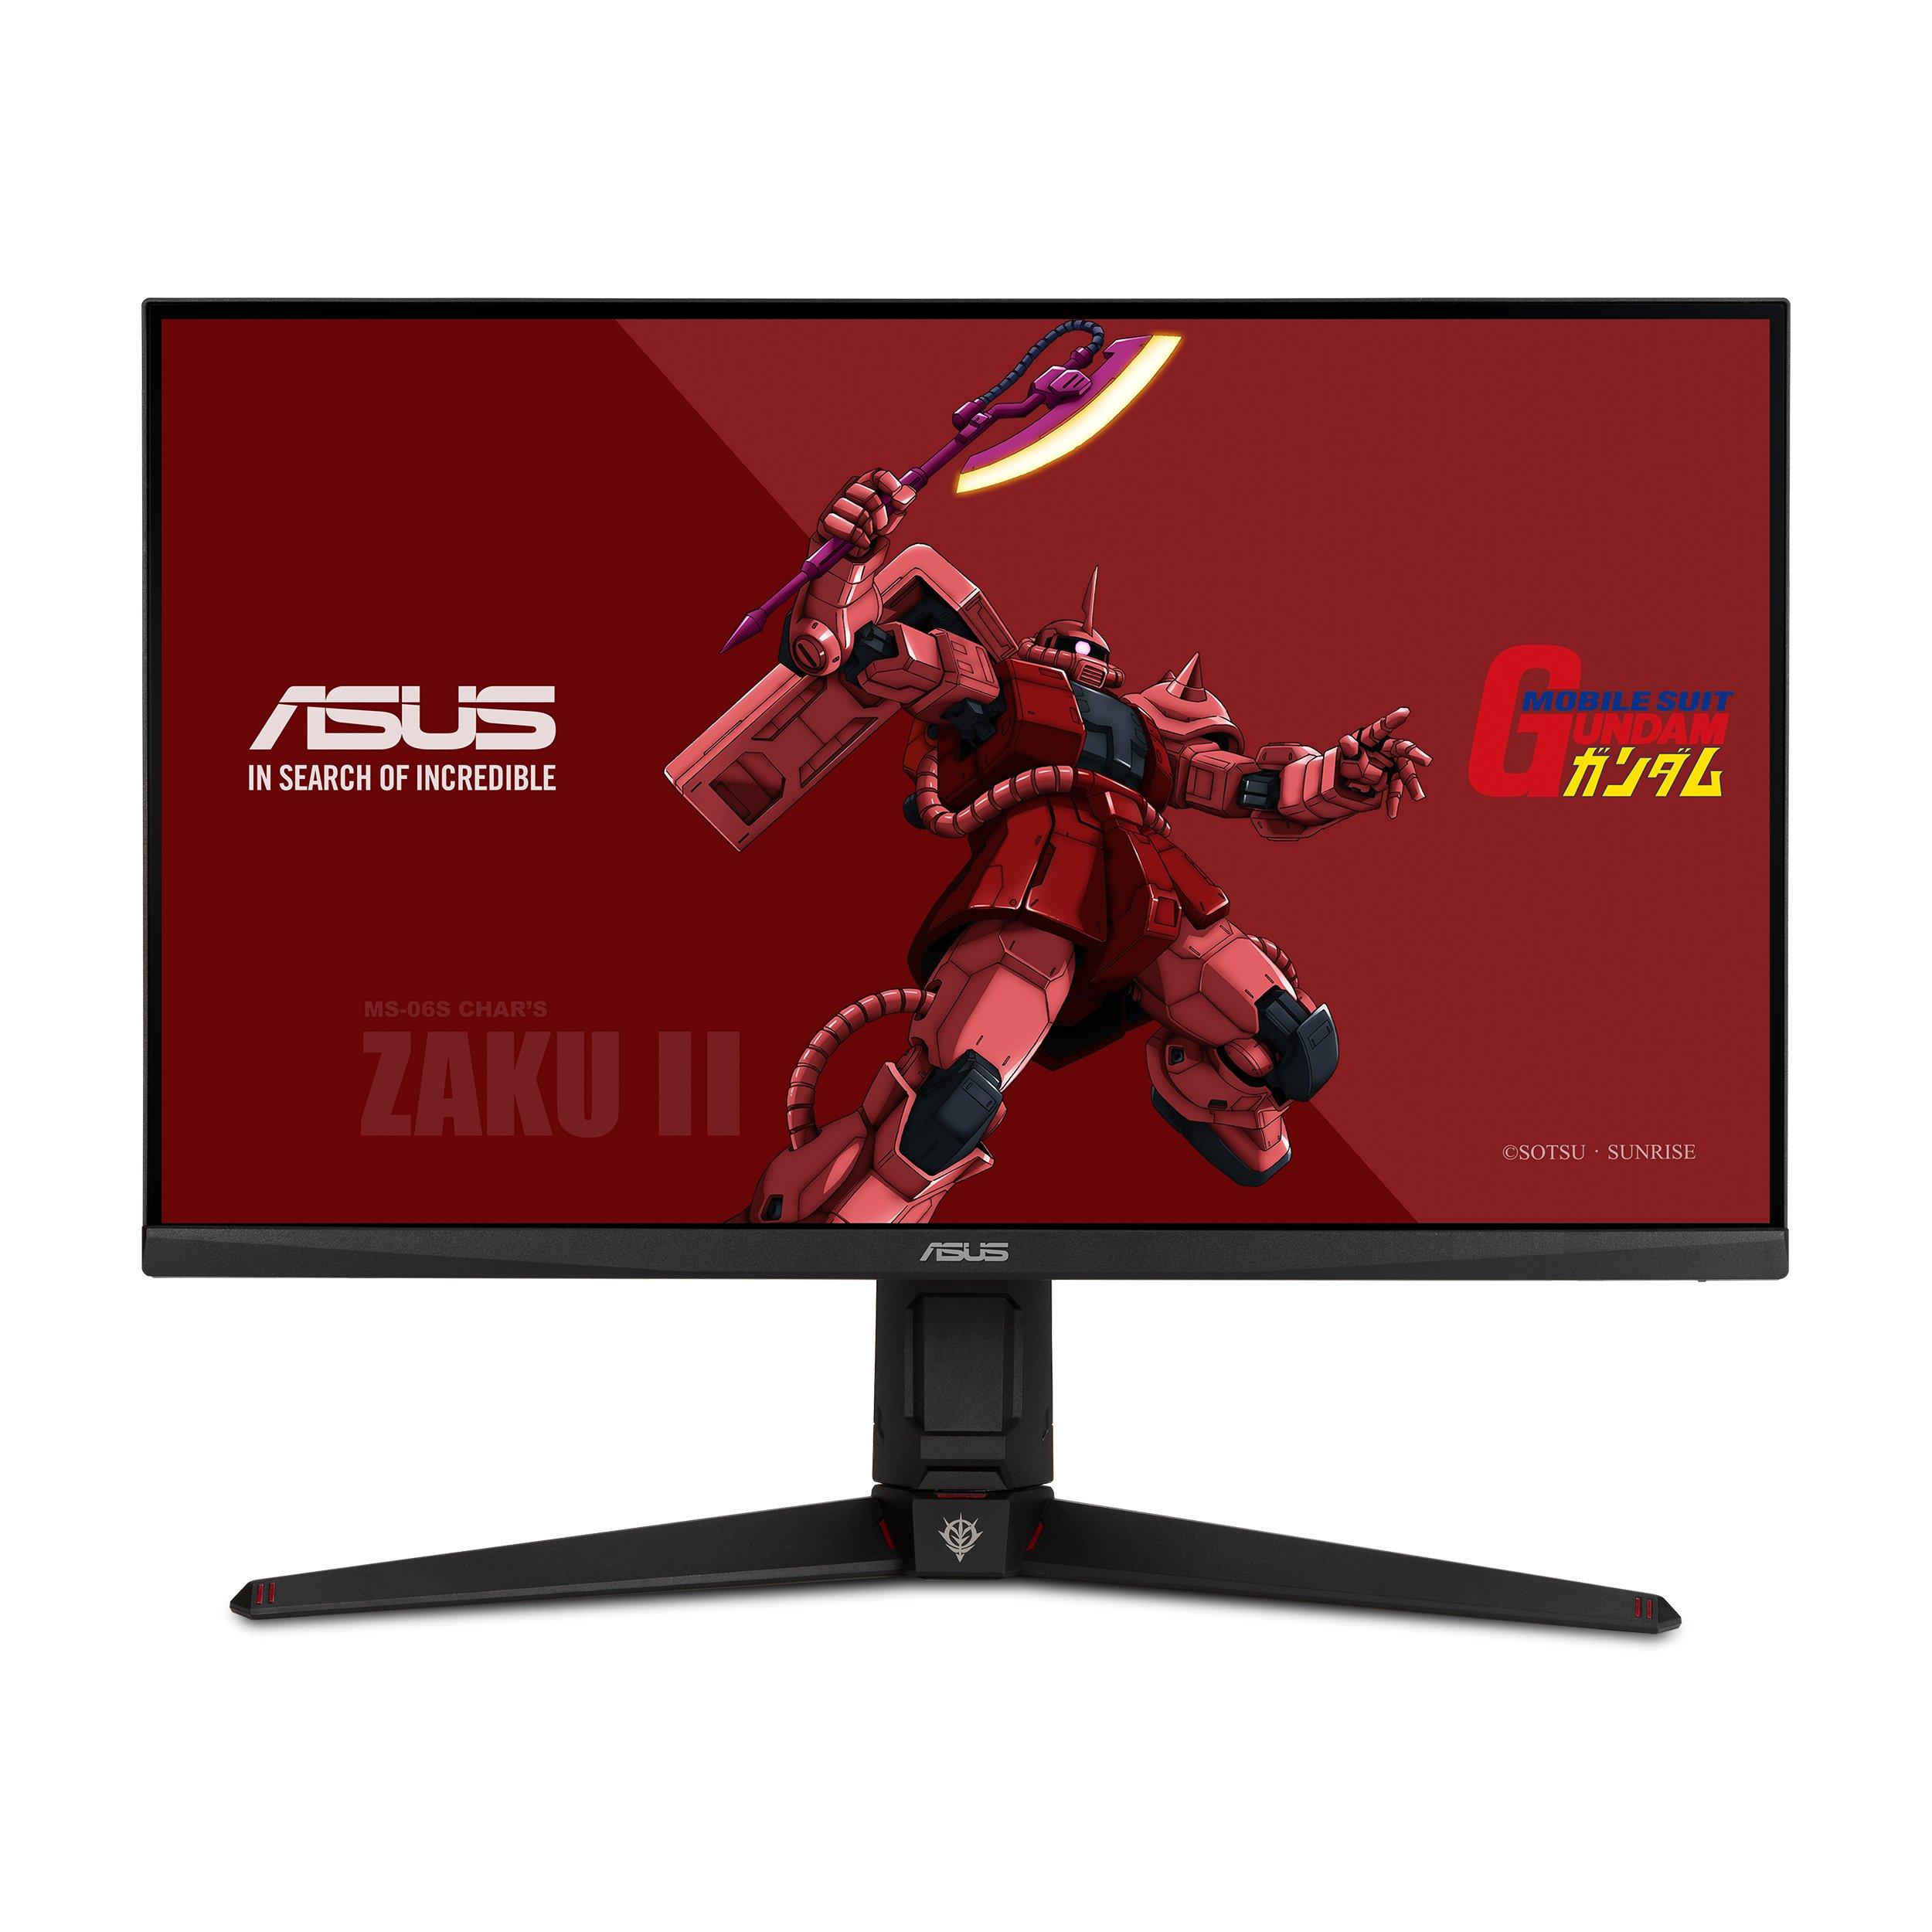 list item 2 of 8 ASUS TUF Gaming 27-in ZAKU II Edition HDR Gaming Monitor VG27AQGL1A